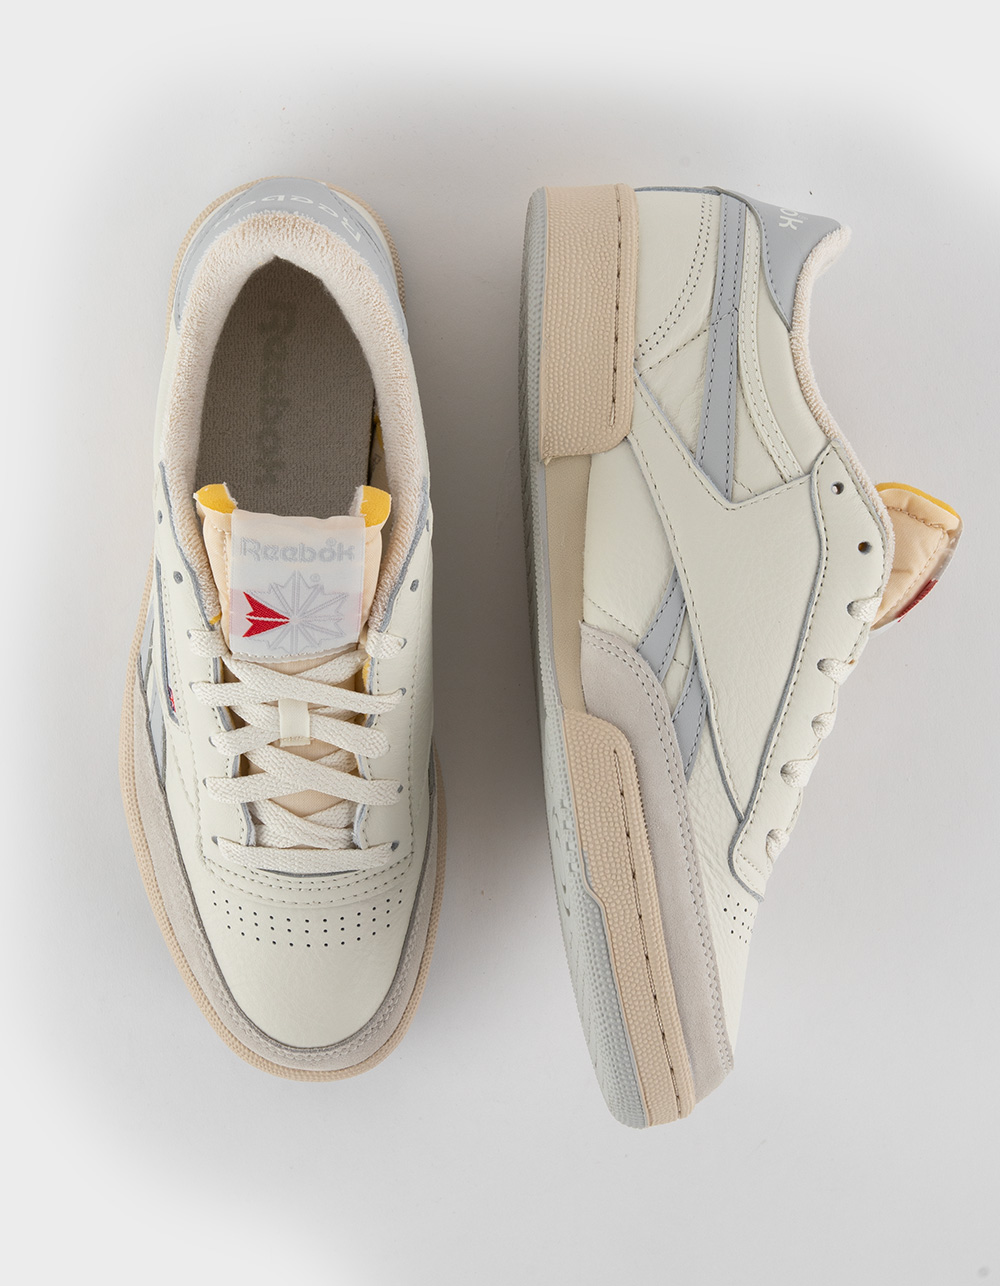 Reebok Club C revenge sneakers in off-white with brown detail - ShopStyle